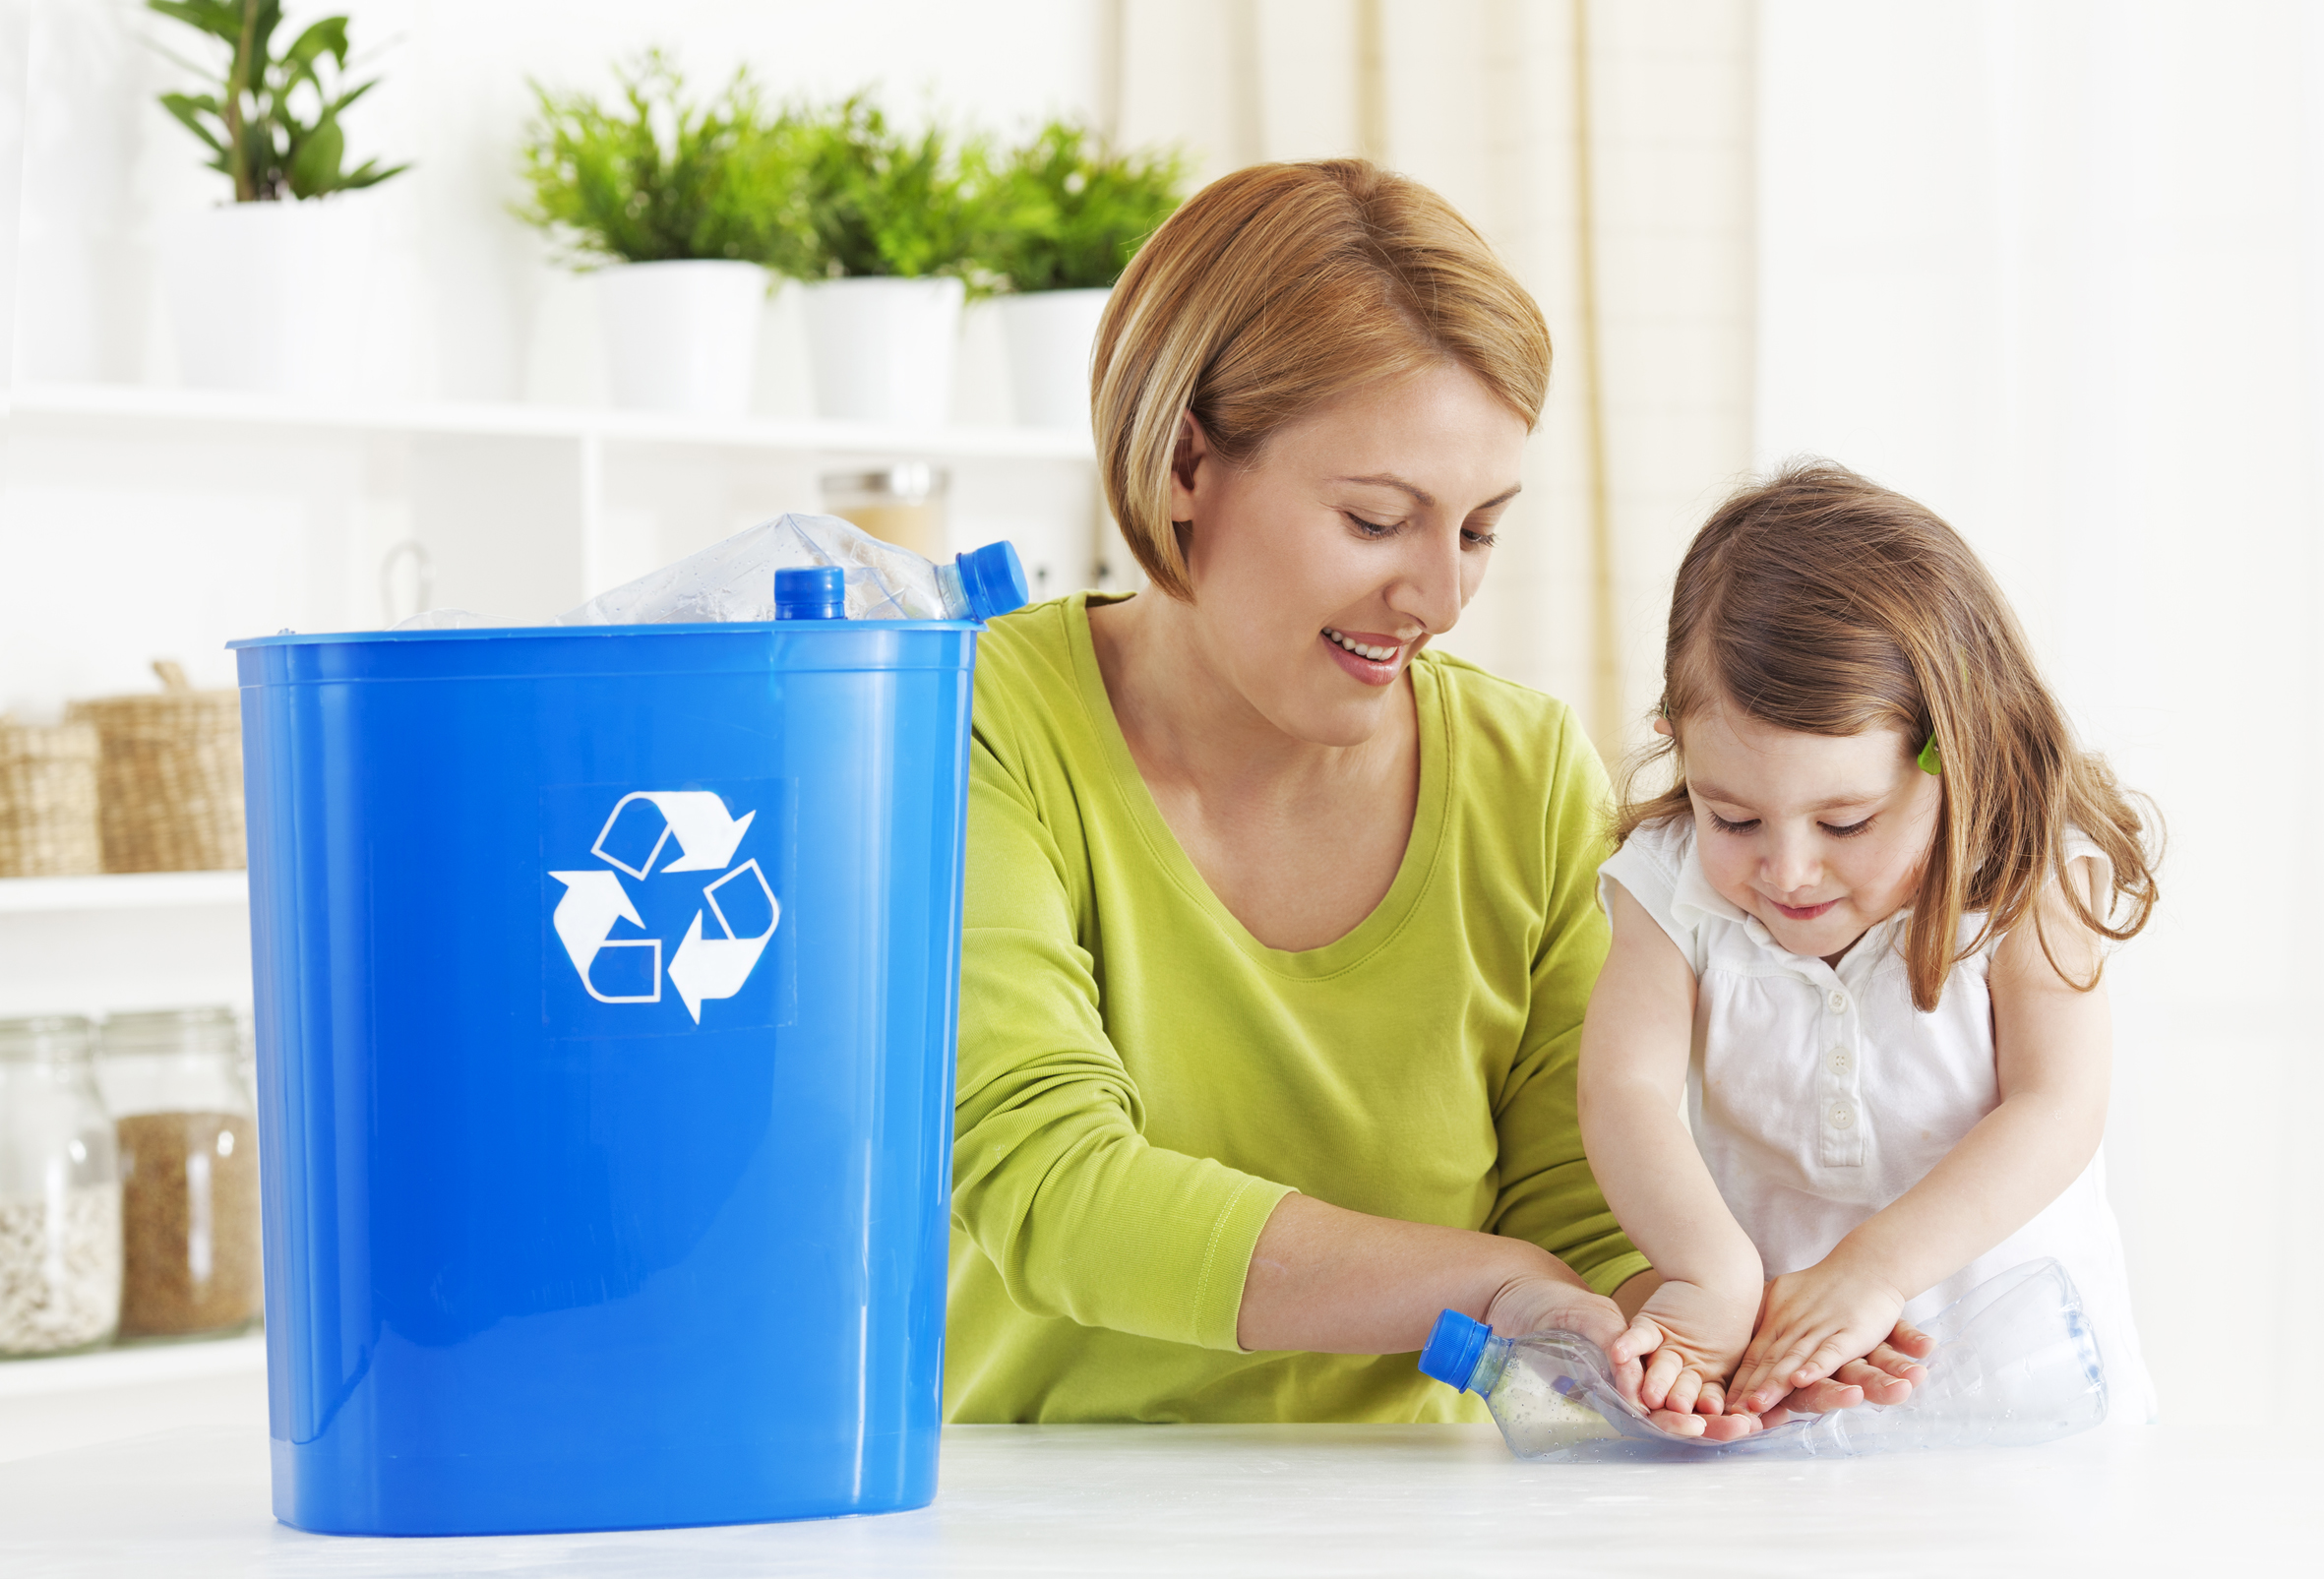 Make recycling easy at home